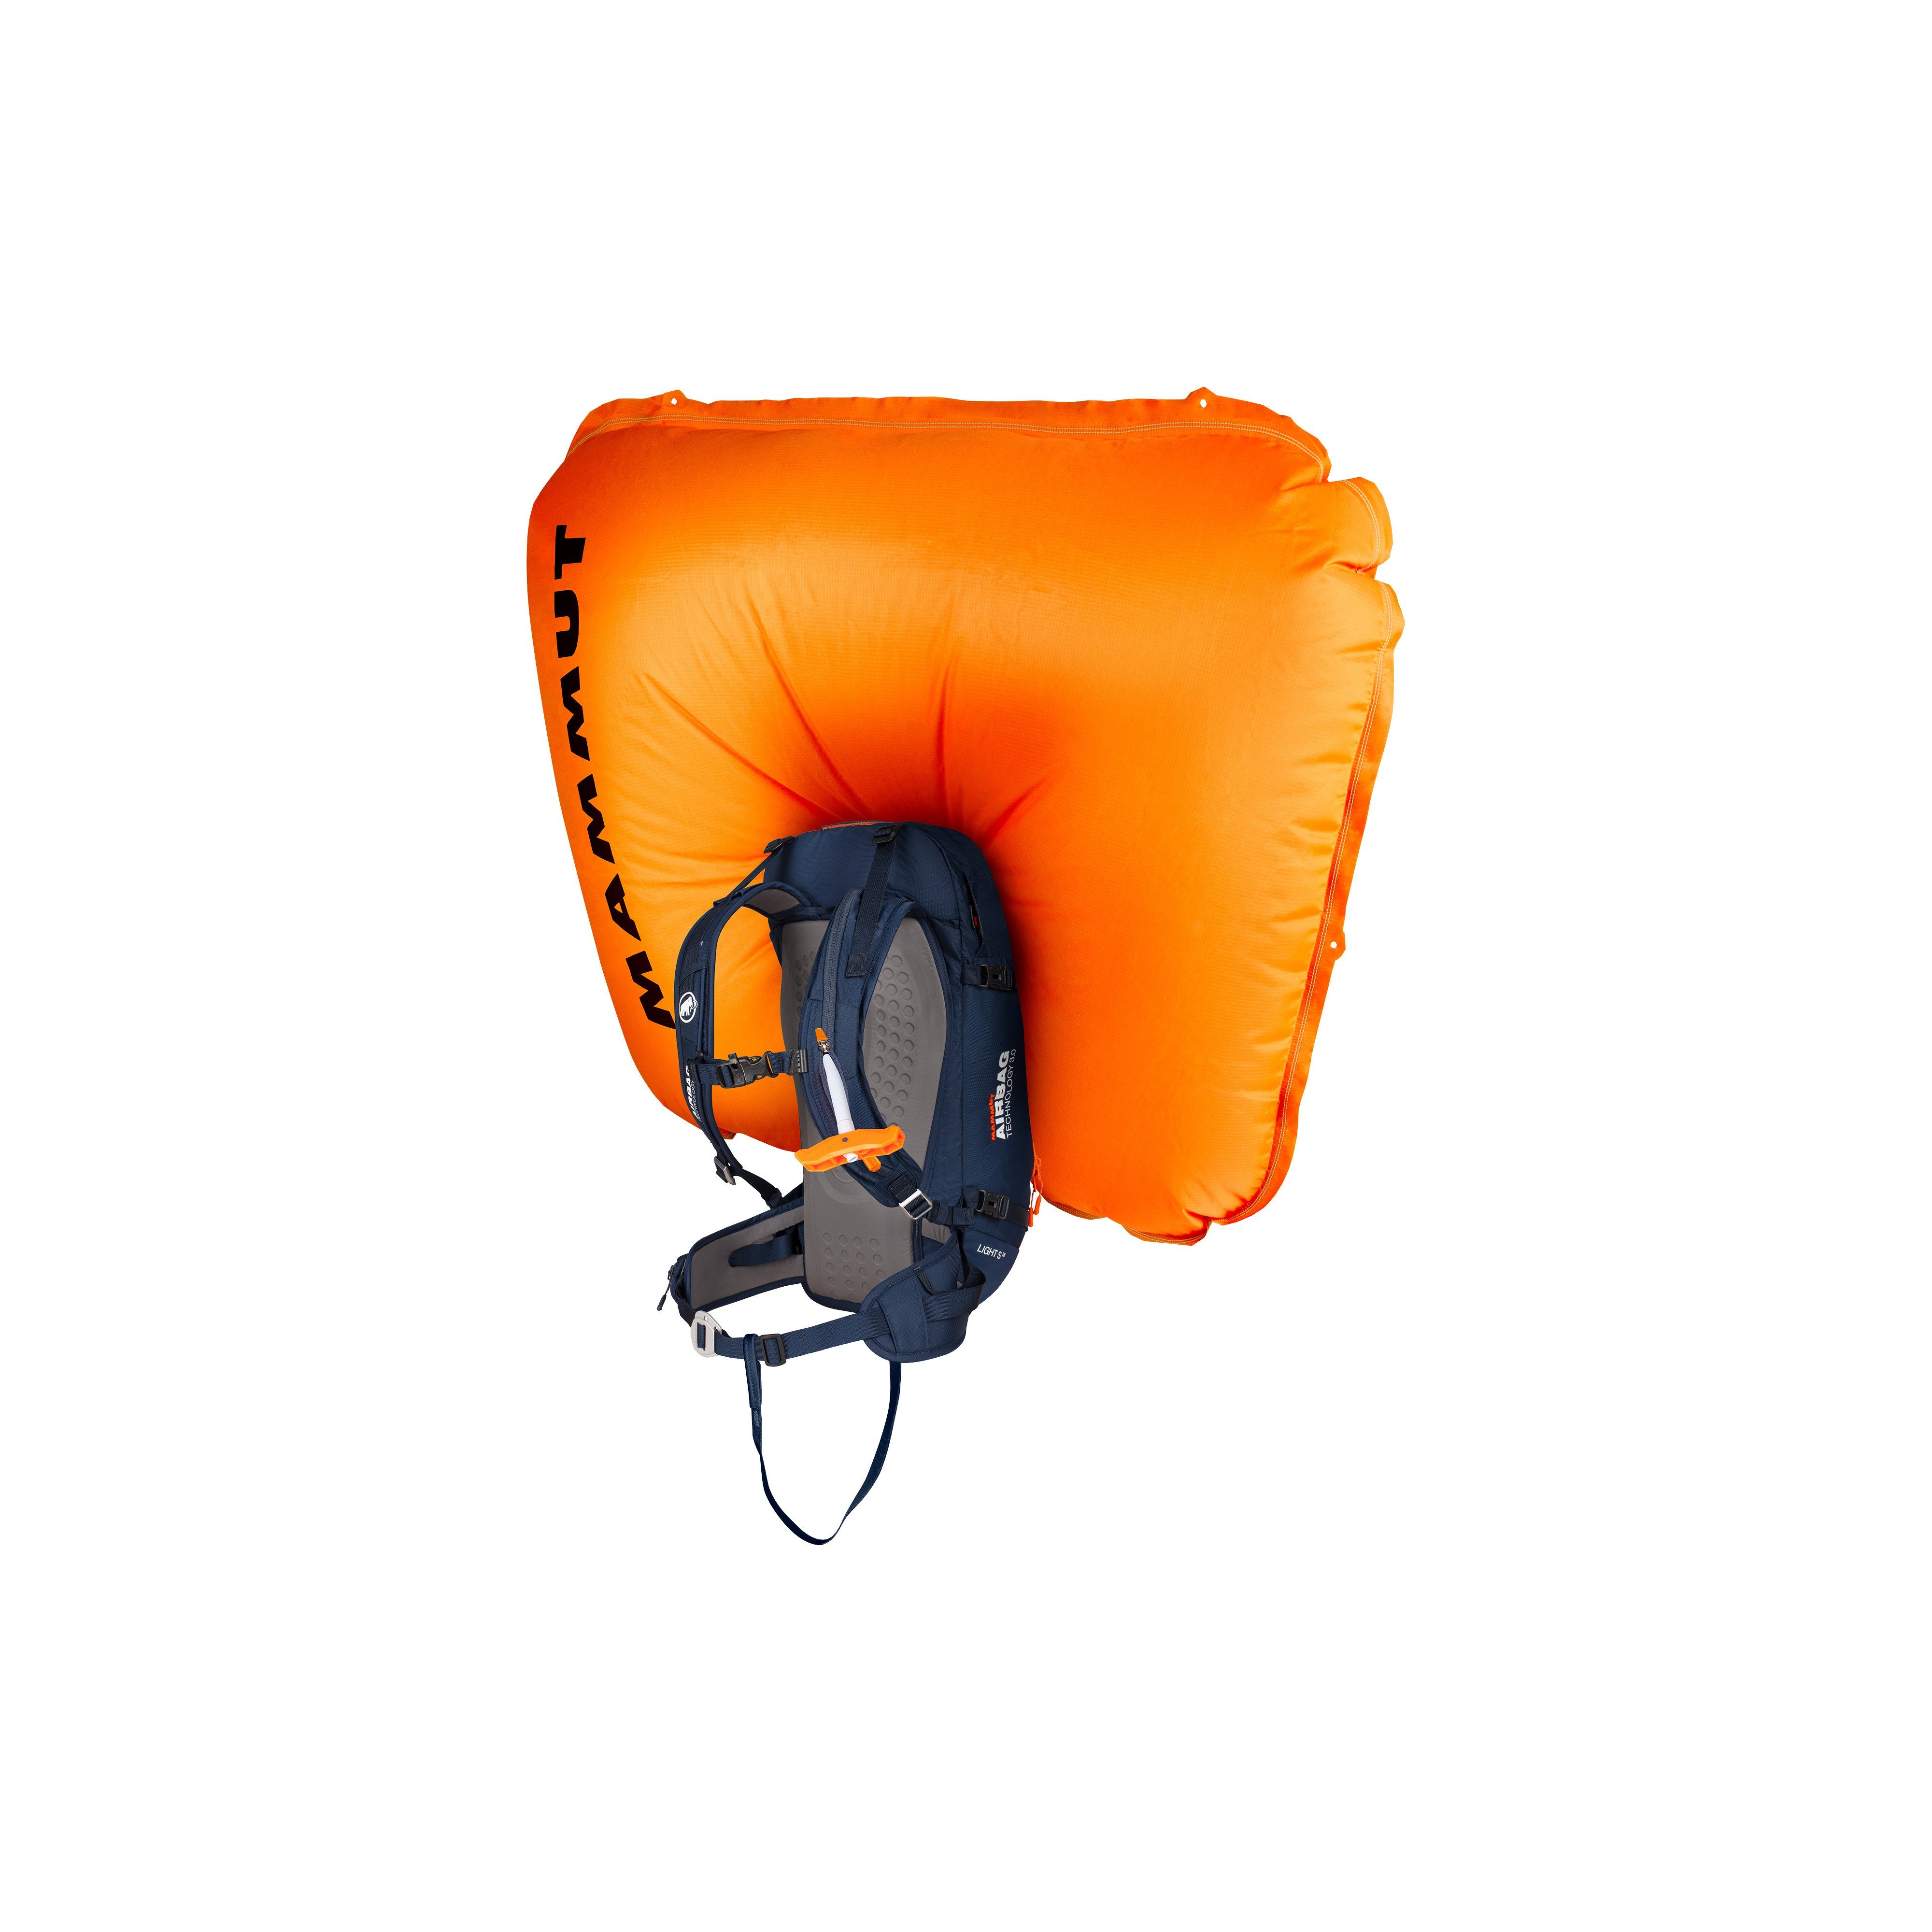 Light Short Removable Airbag 3.0 - night, 28 L product image